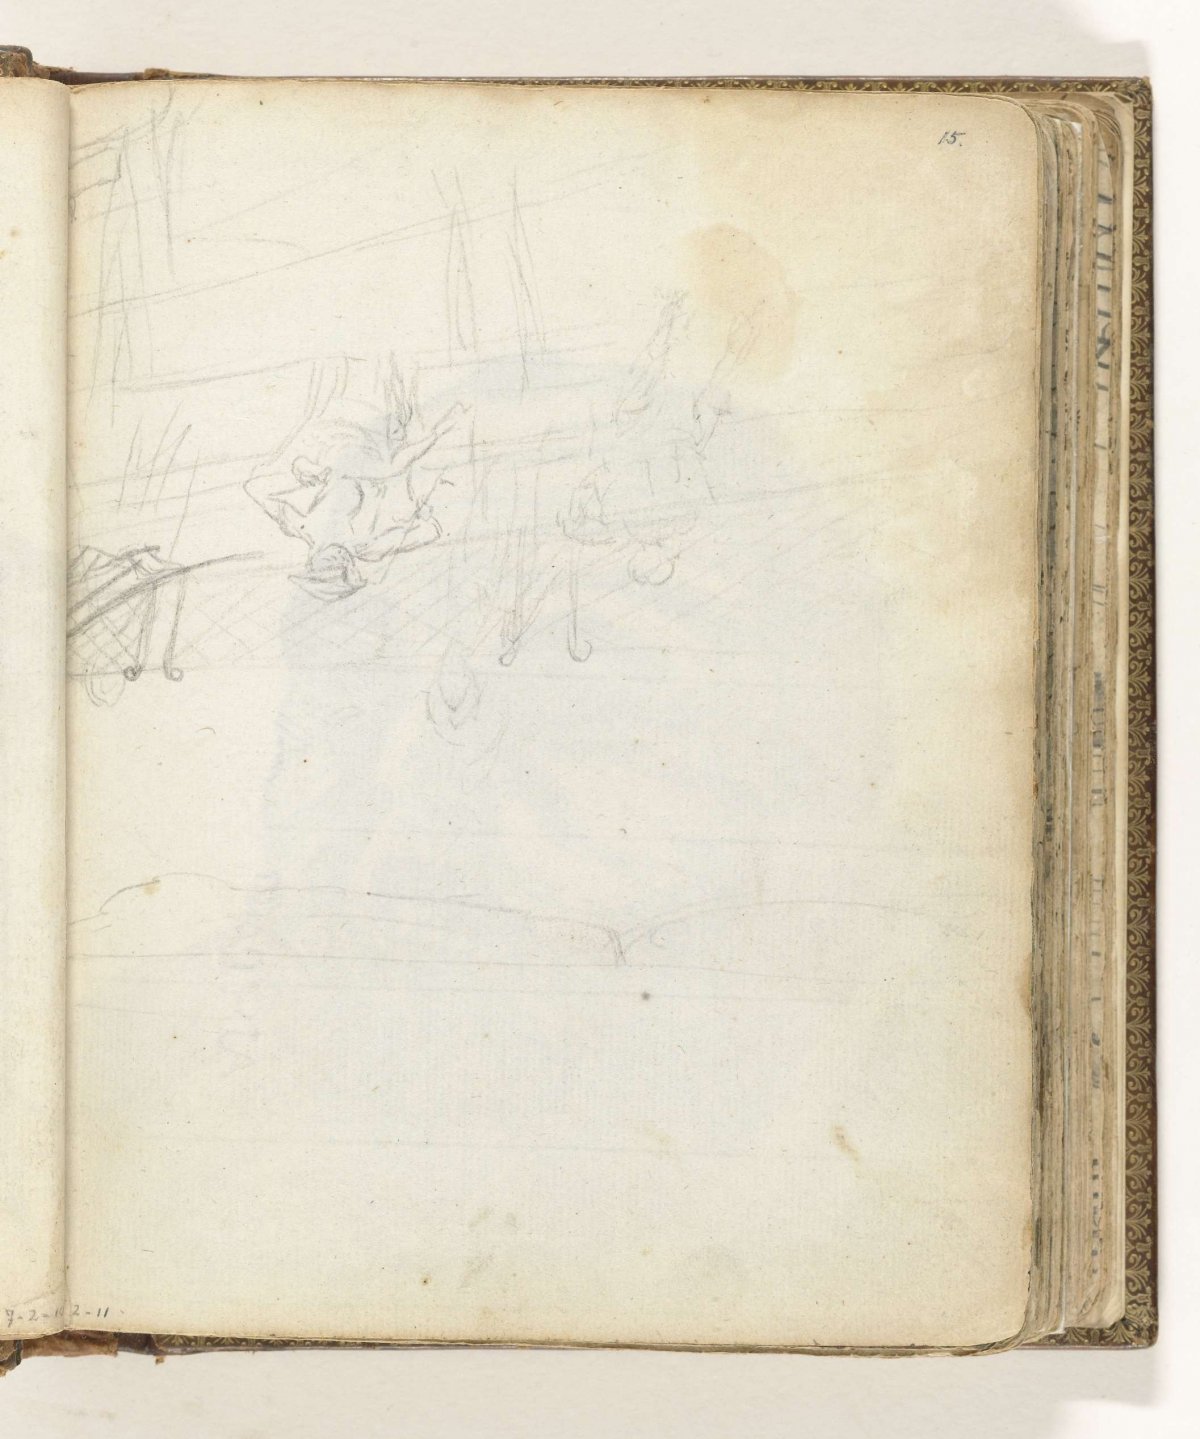 Sketch of two people on a ship's deck, Jan Brandes, 1770 - 1808